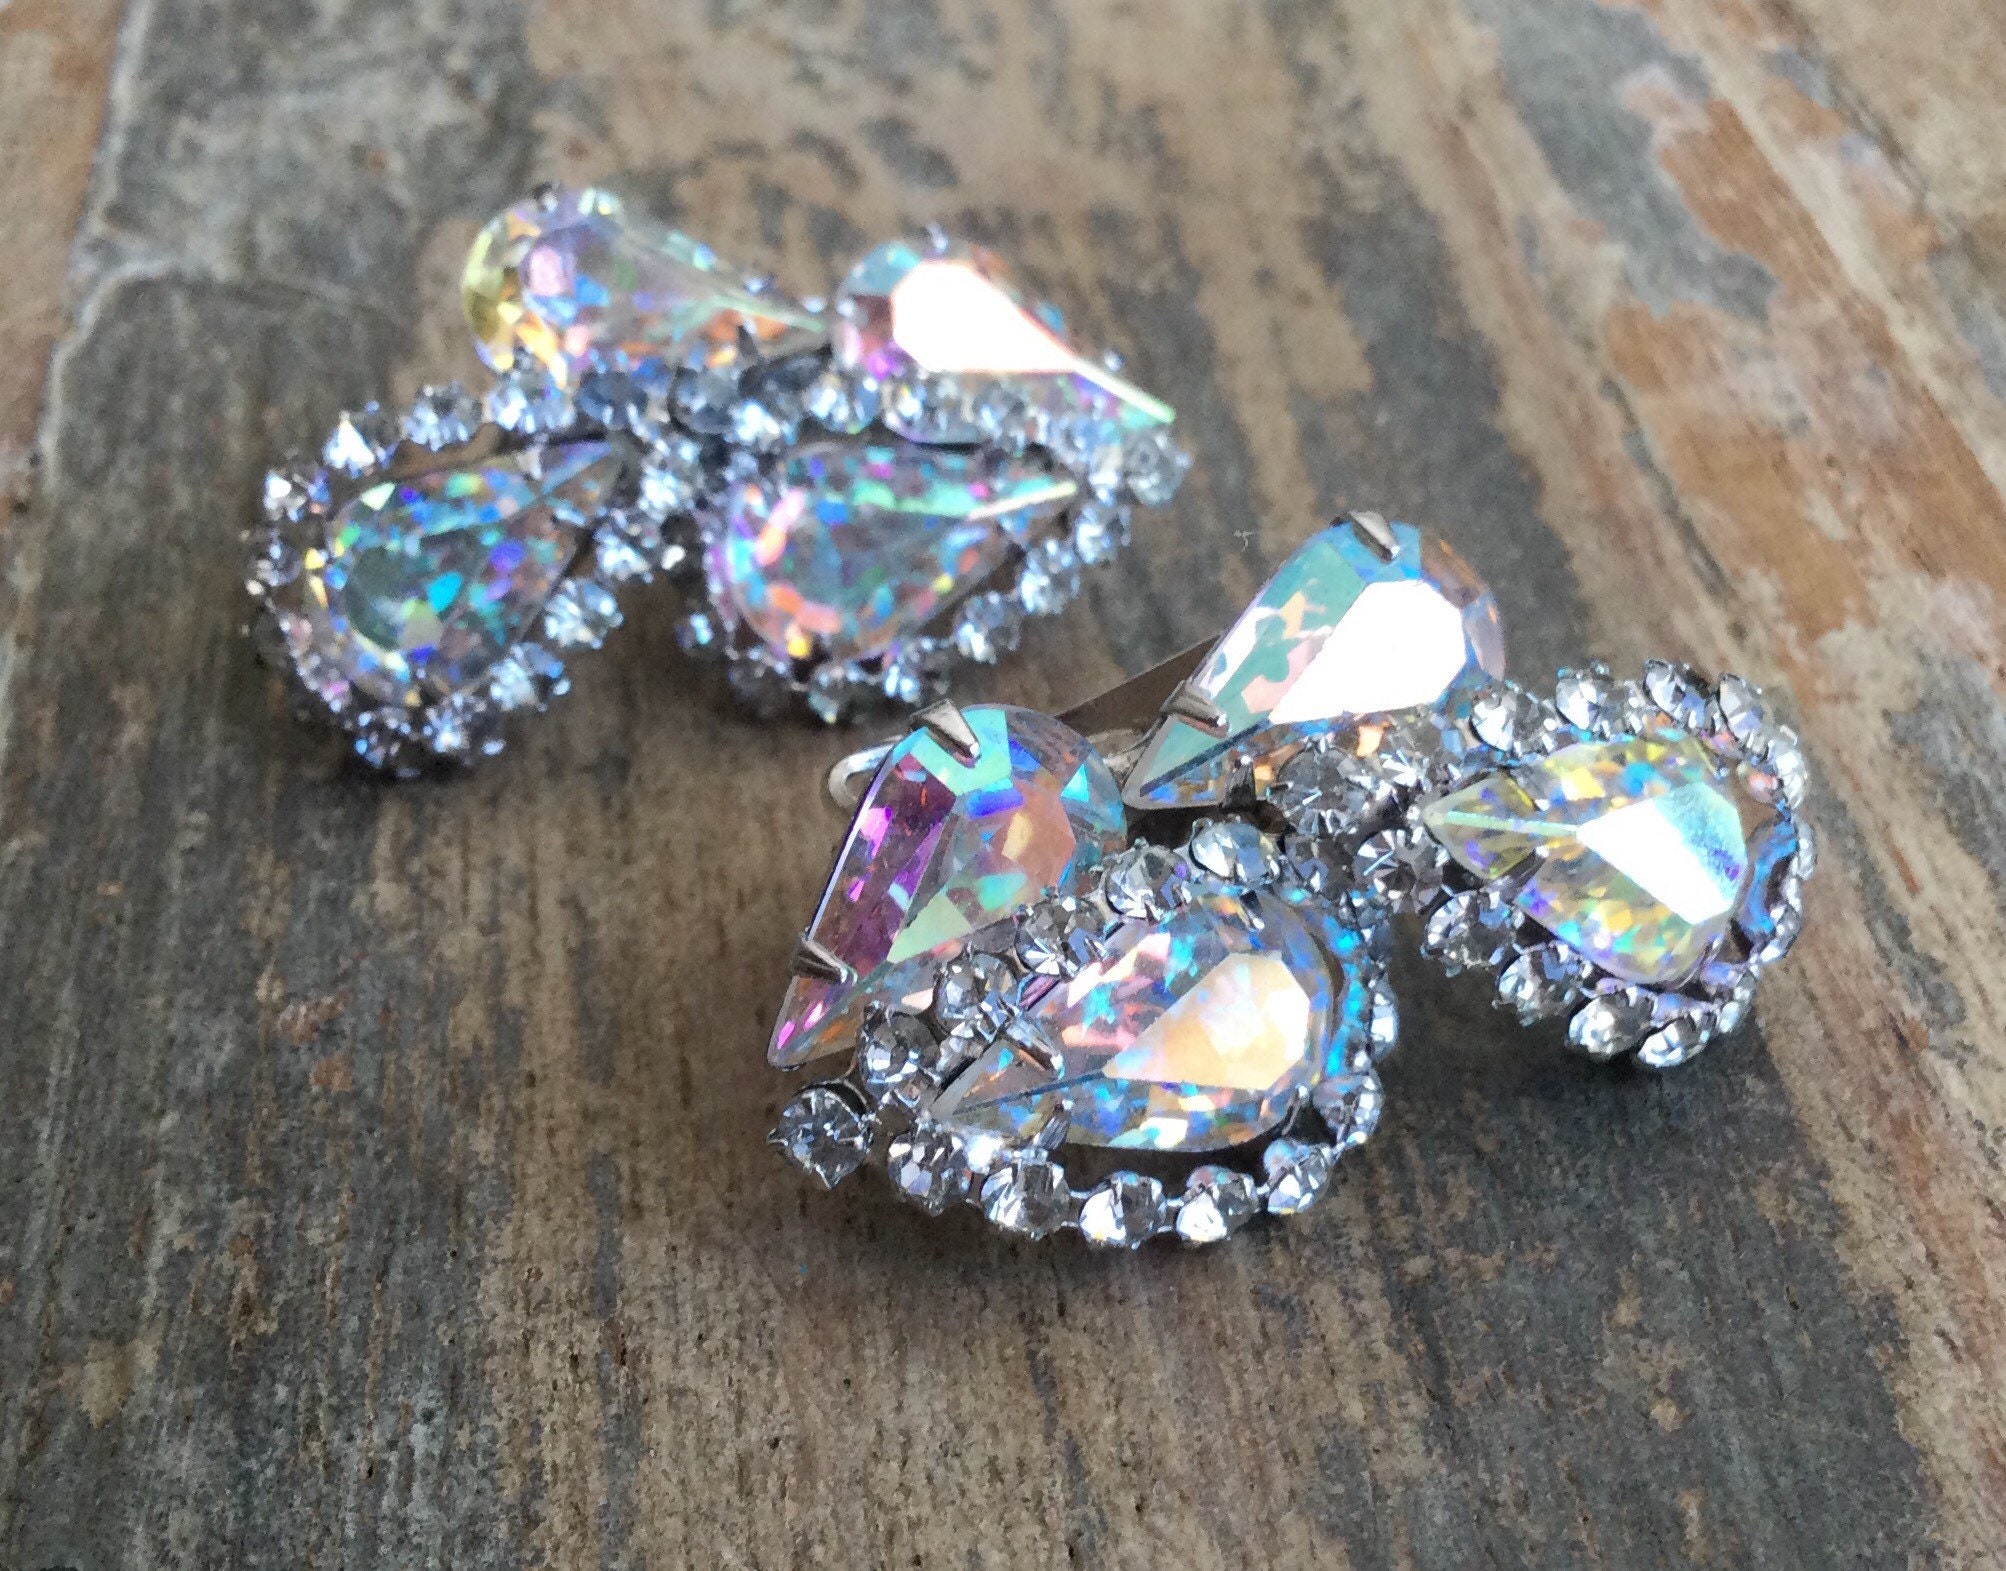 AB Crystal WEISS Sparkly Clip On Climber Earrings Vintage Signed Estate Sale Costume Jewelry Set Teardrop Cit Aurora Borealis Rhinestone Lot